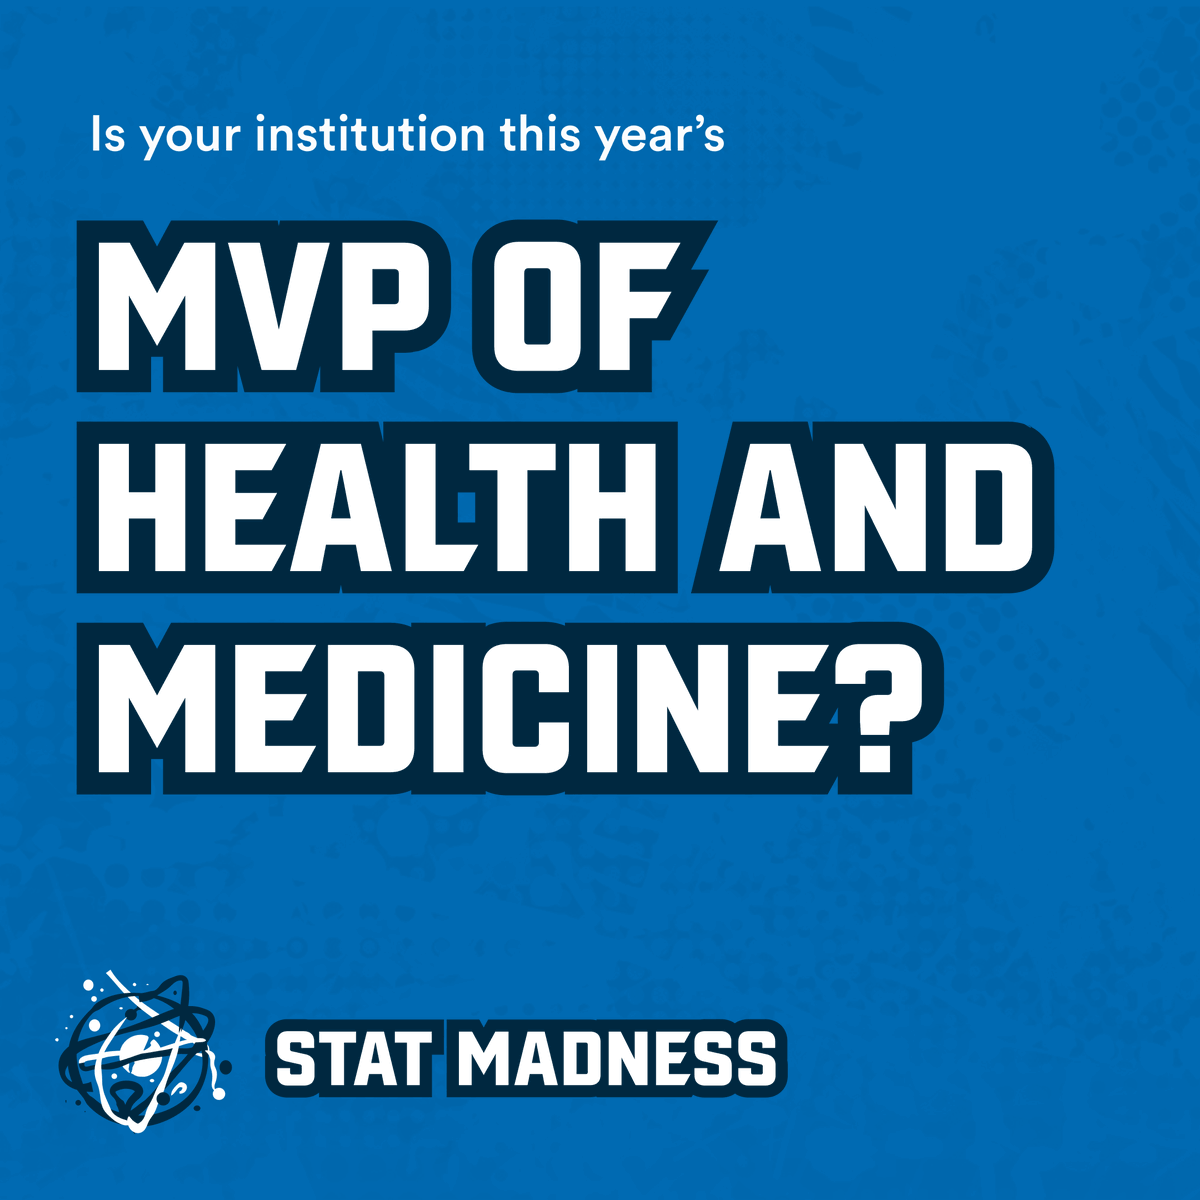 Voting is open for the 2024 #STATMadness tournament! Help us crown a champion as the best innovation in science and medicine: trib.al/kKJ97Wo